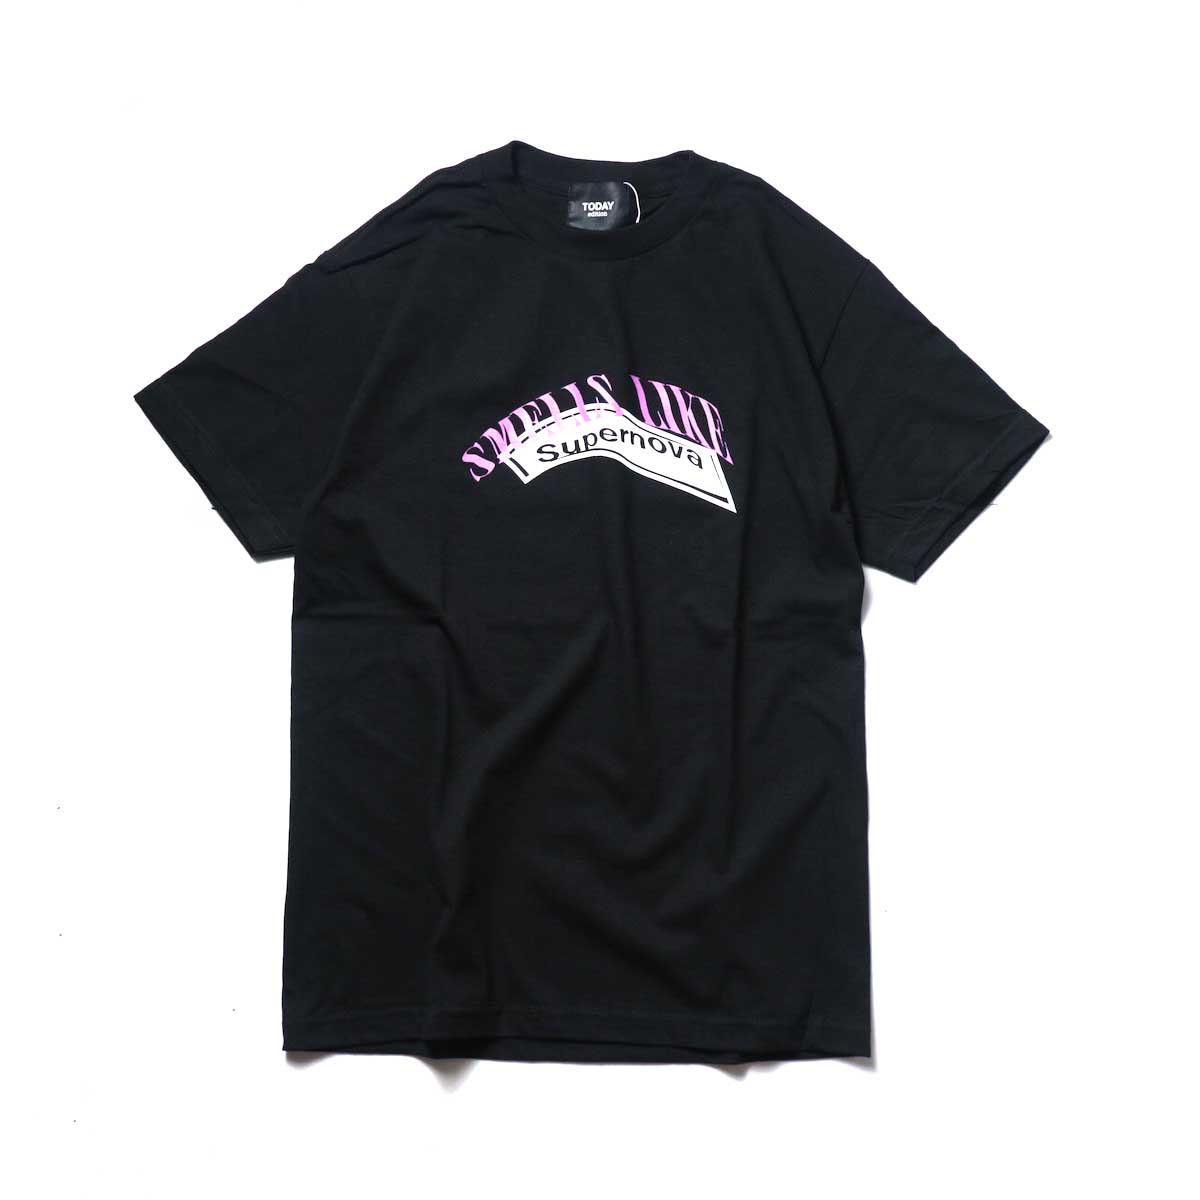 TODAY edition / 90s Boot #1 SS Tee (Black)